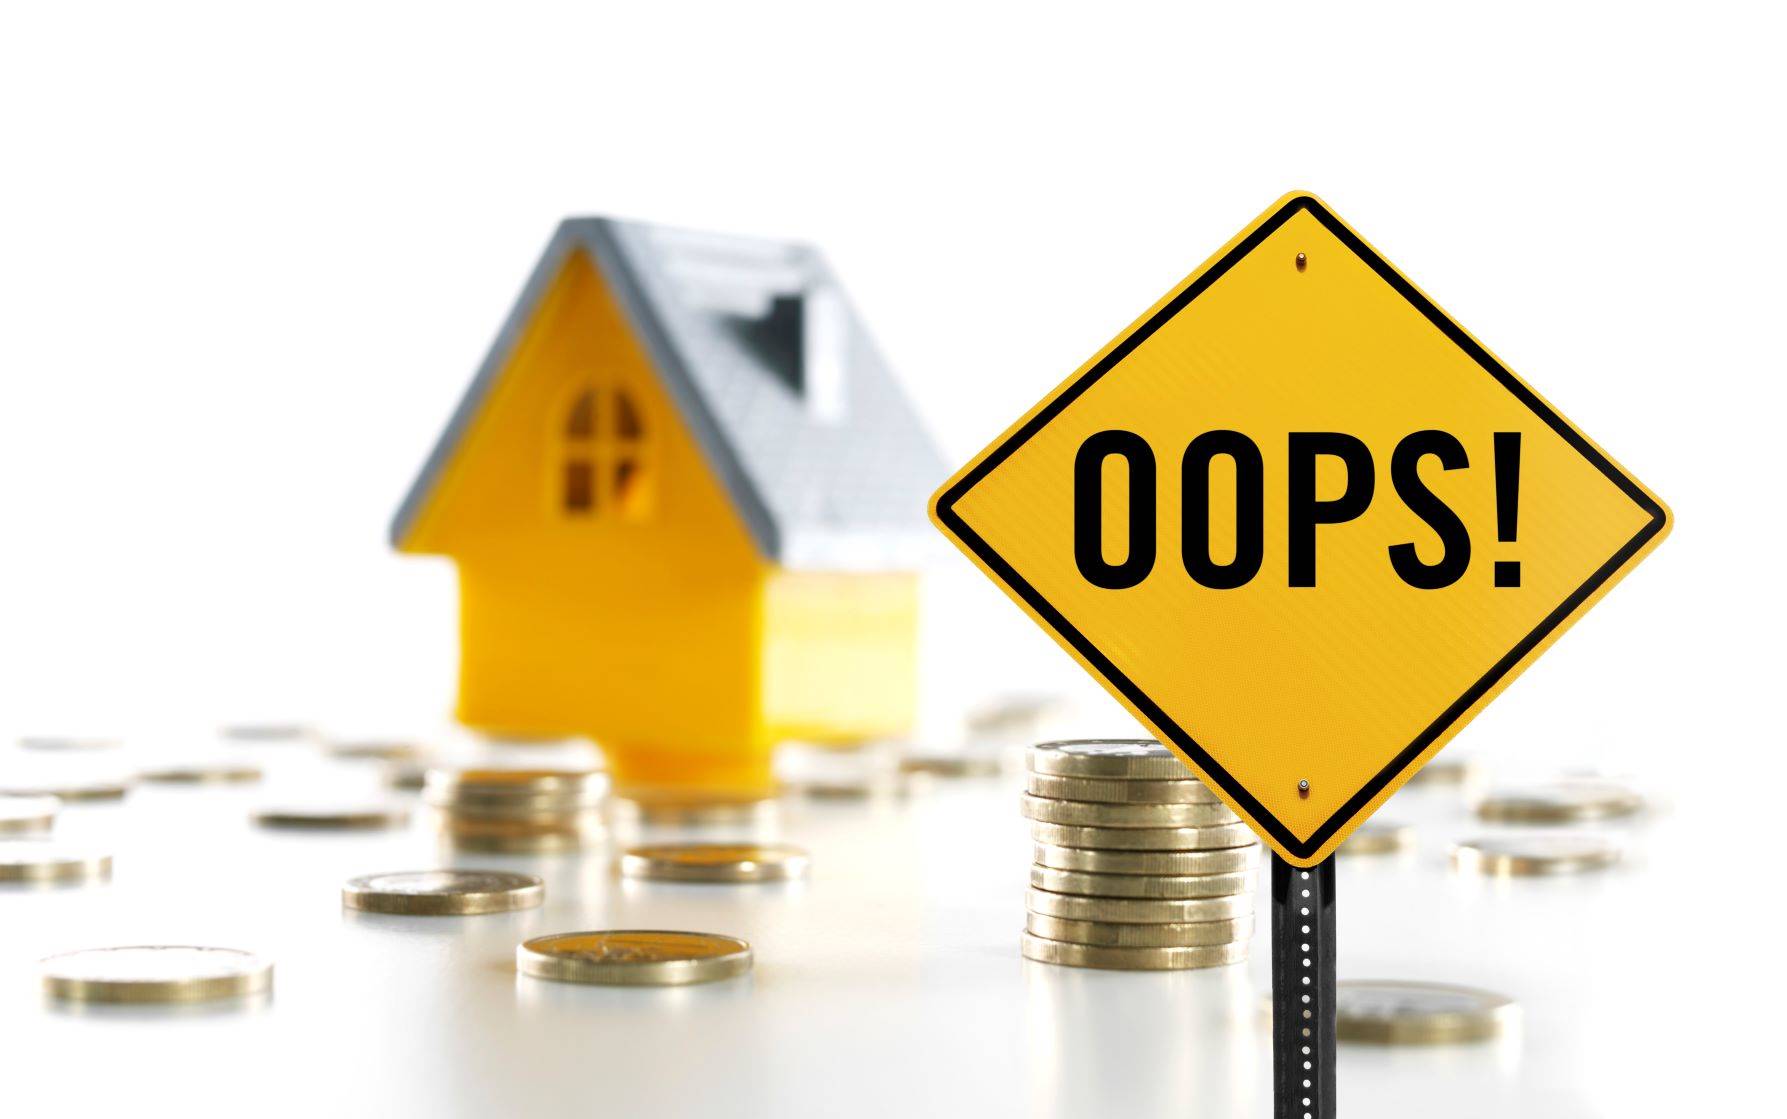 Yellow sign with word ‘Oops’ in front of a toy house and coins